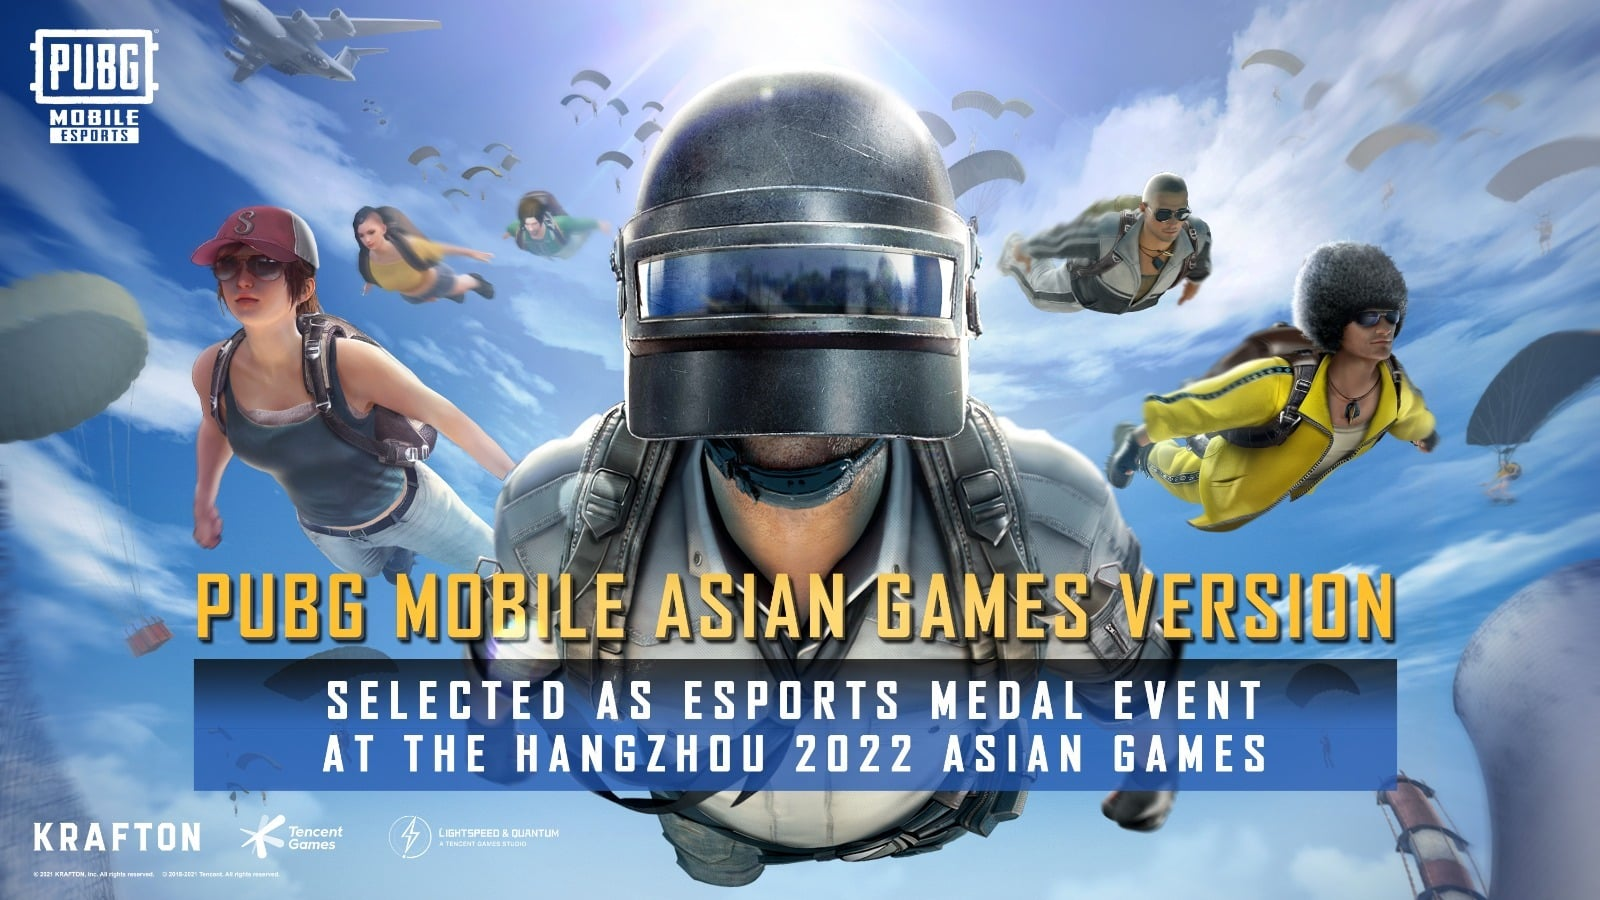 The Asian Games is due to feature esports that popular with gamers, but some have been modified to make them less violent ©Krafton 